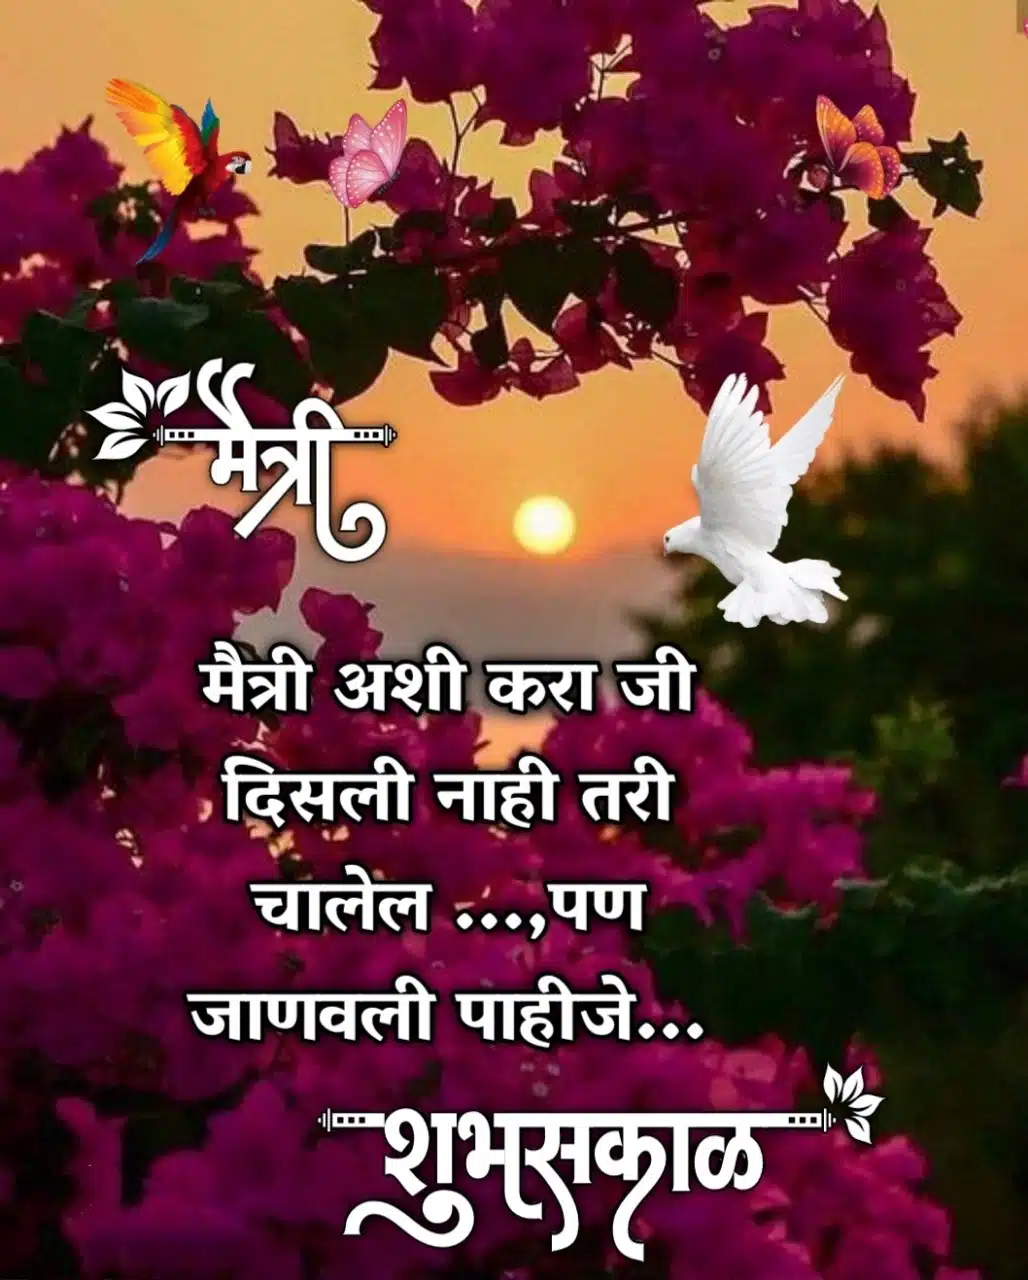 Good Morning Images In Marathi For Friends, Maitri Good Morning SMS In Marathi